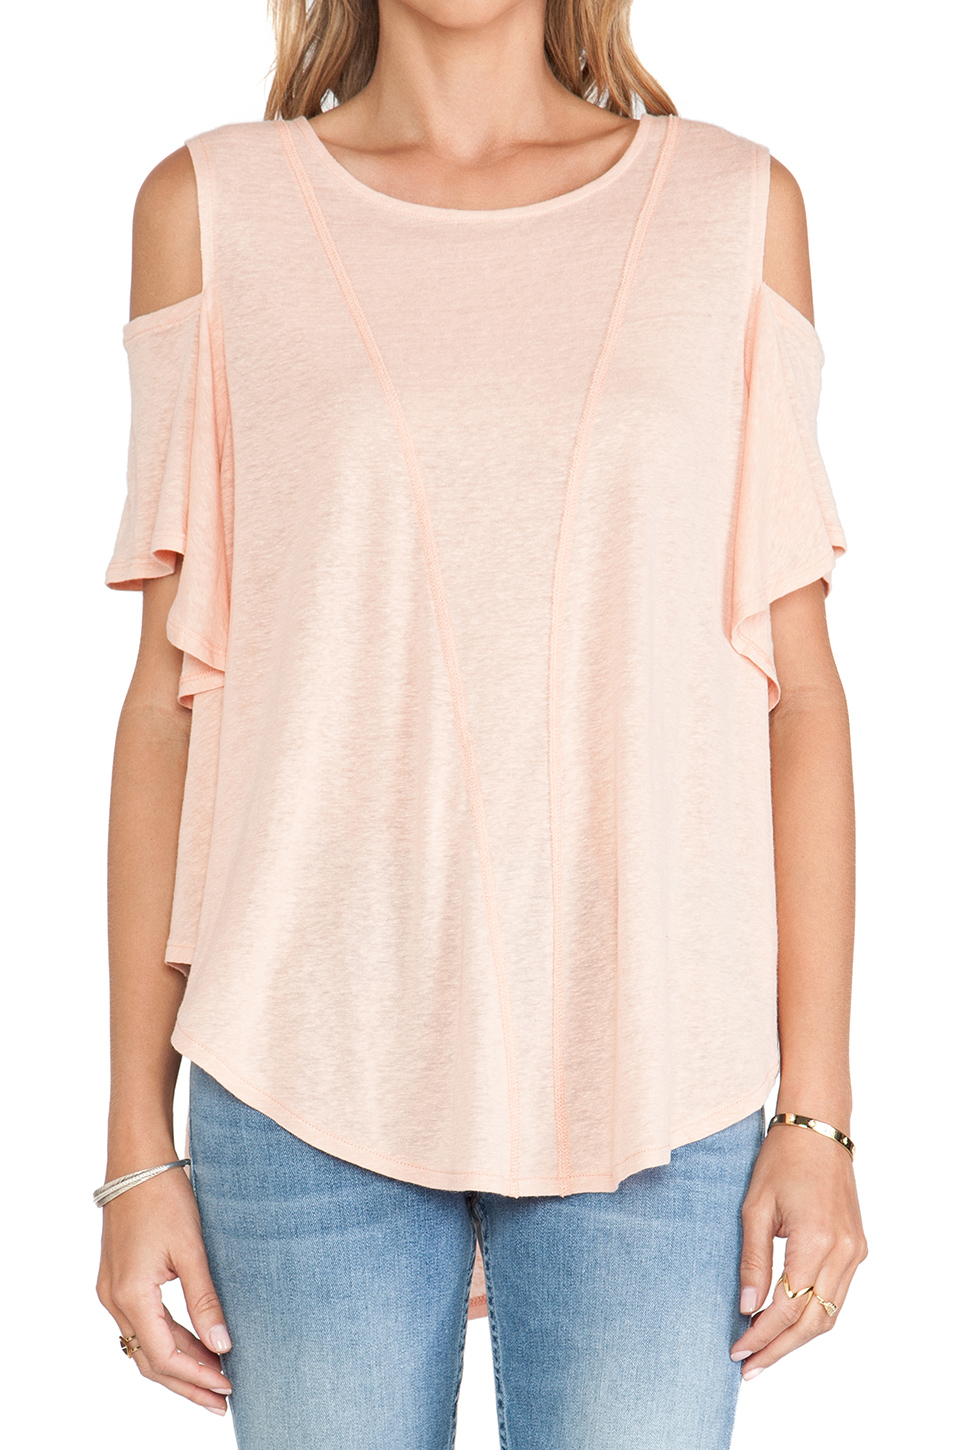 Free People Cold Shoulder Top in Pink (Peach) | Lyst